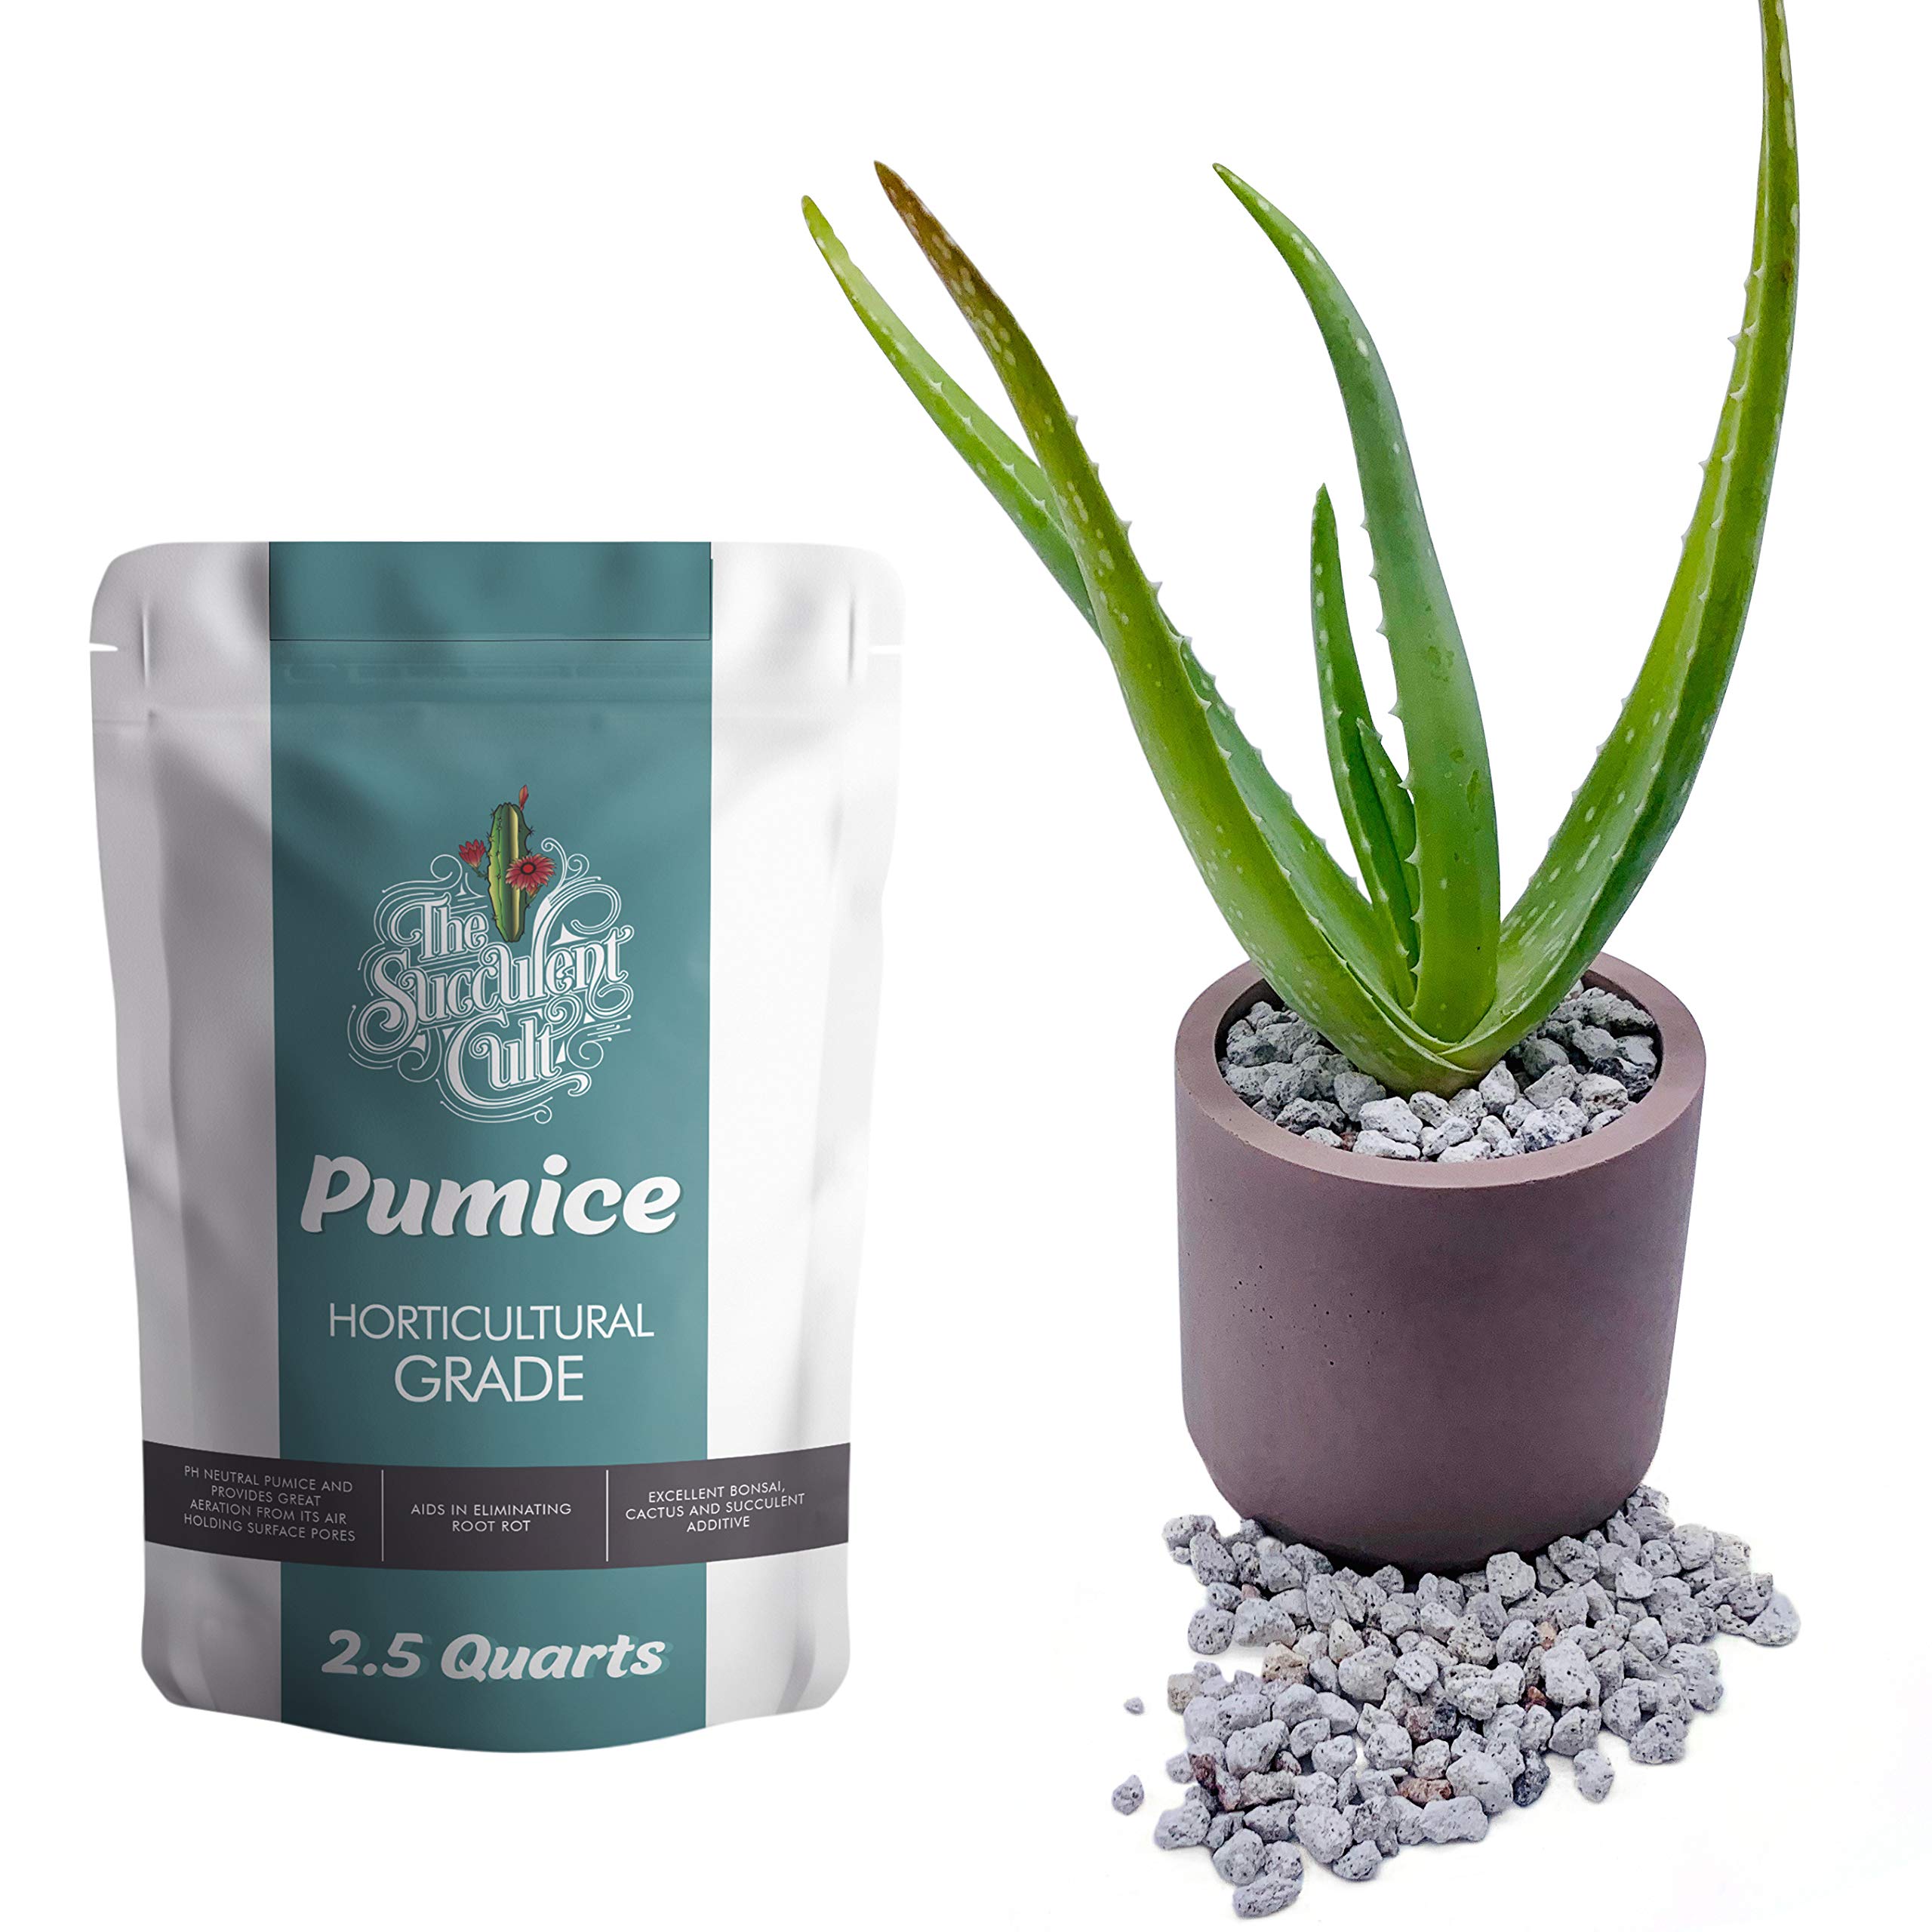 Horticultural Grade Pumice (2.5 Dry QUARTS) - Bonsai, Cactus, Succulent Soil Additive - Eliminate Root Rot - Ready to Use, by The Succulent Cult